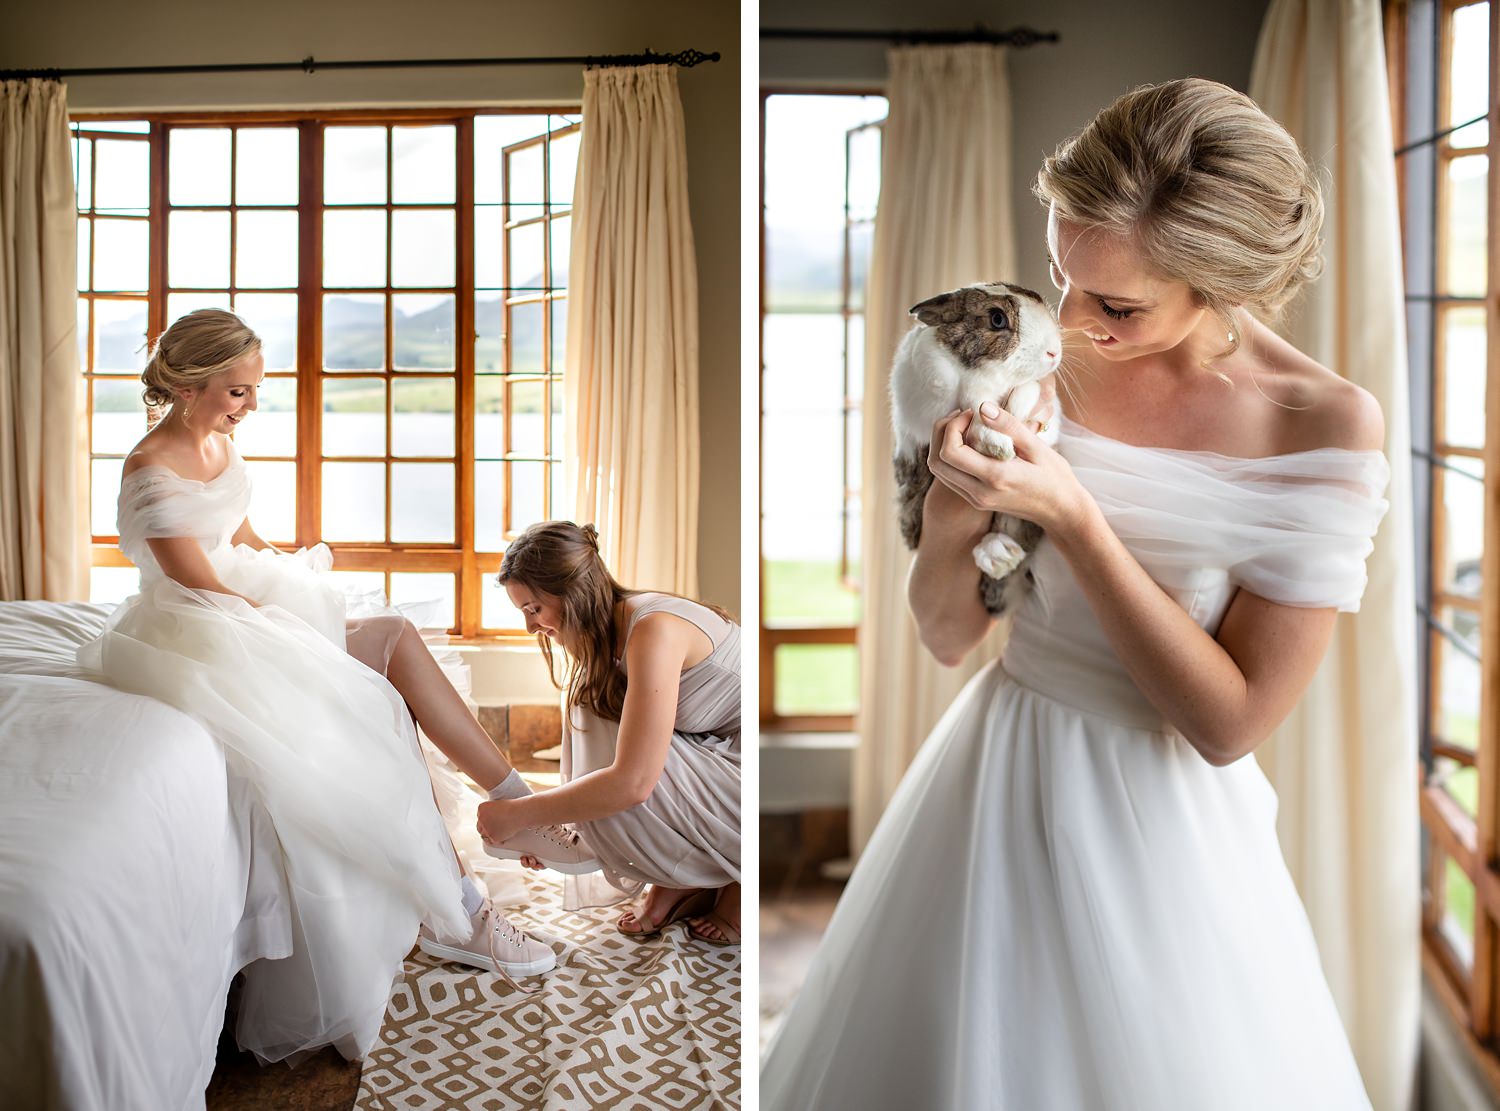 A bride and her bunny rabbit on her wedding day.